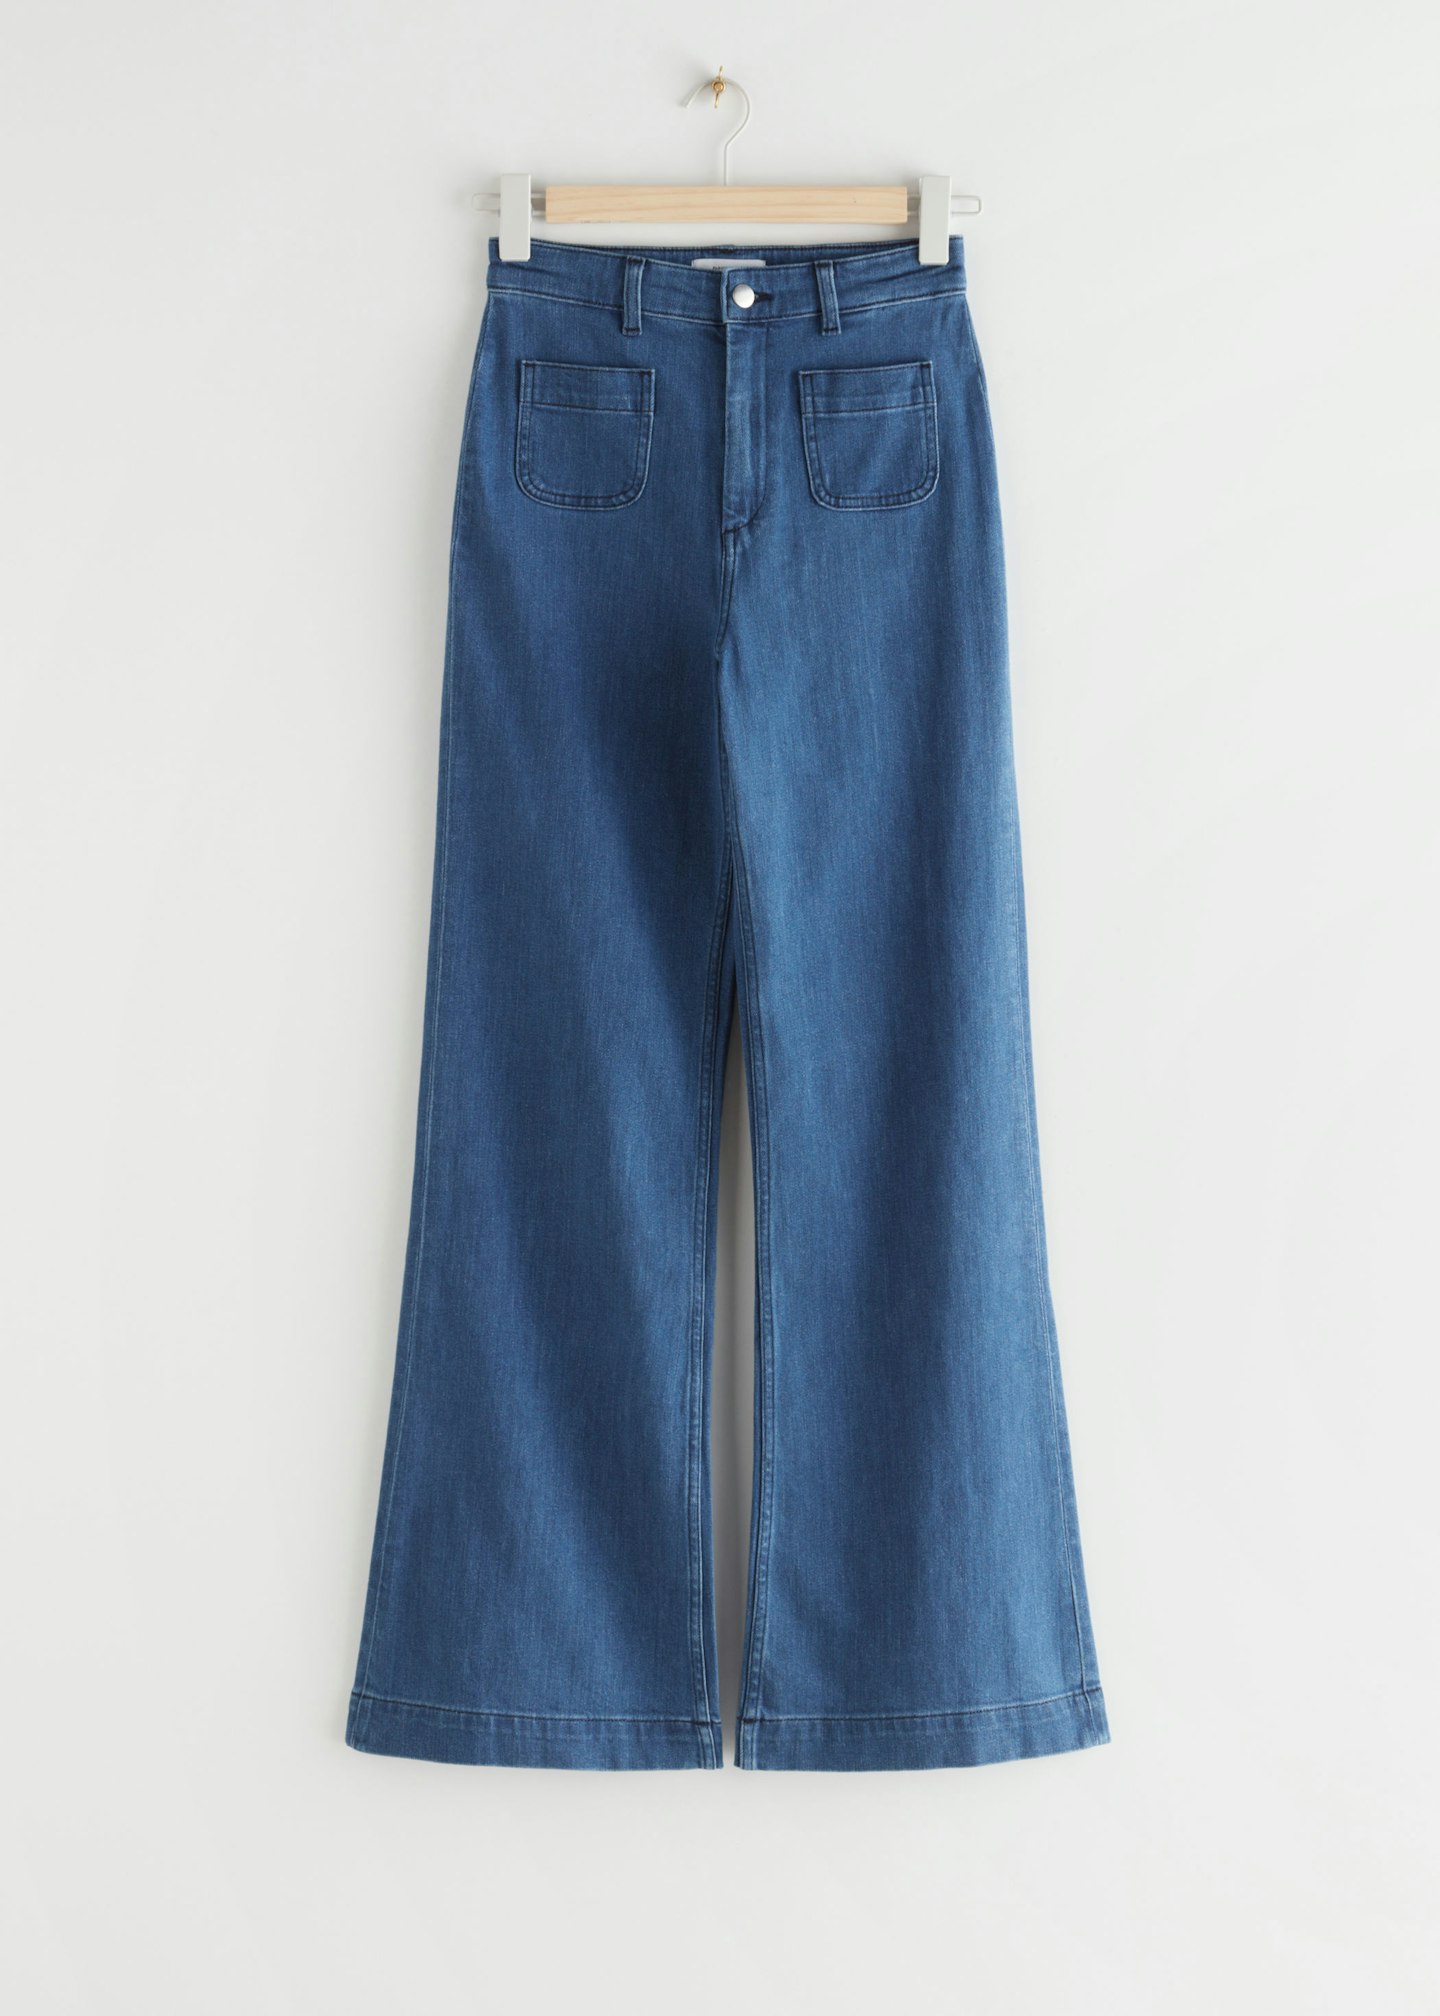 & Other Stories, Flared High Waist Jeans, £65